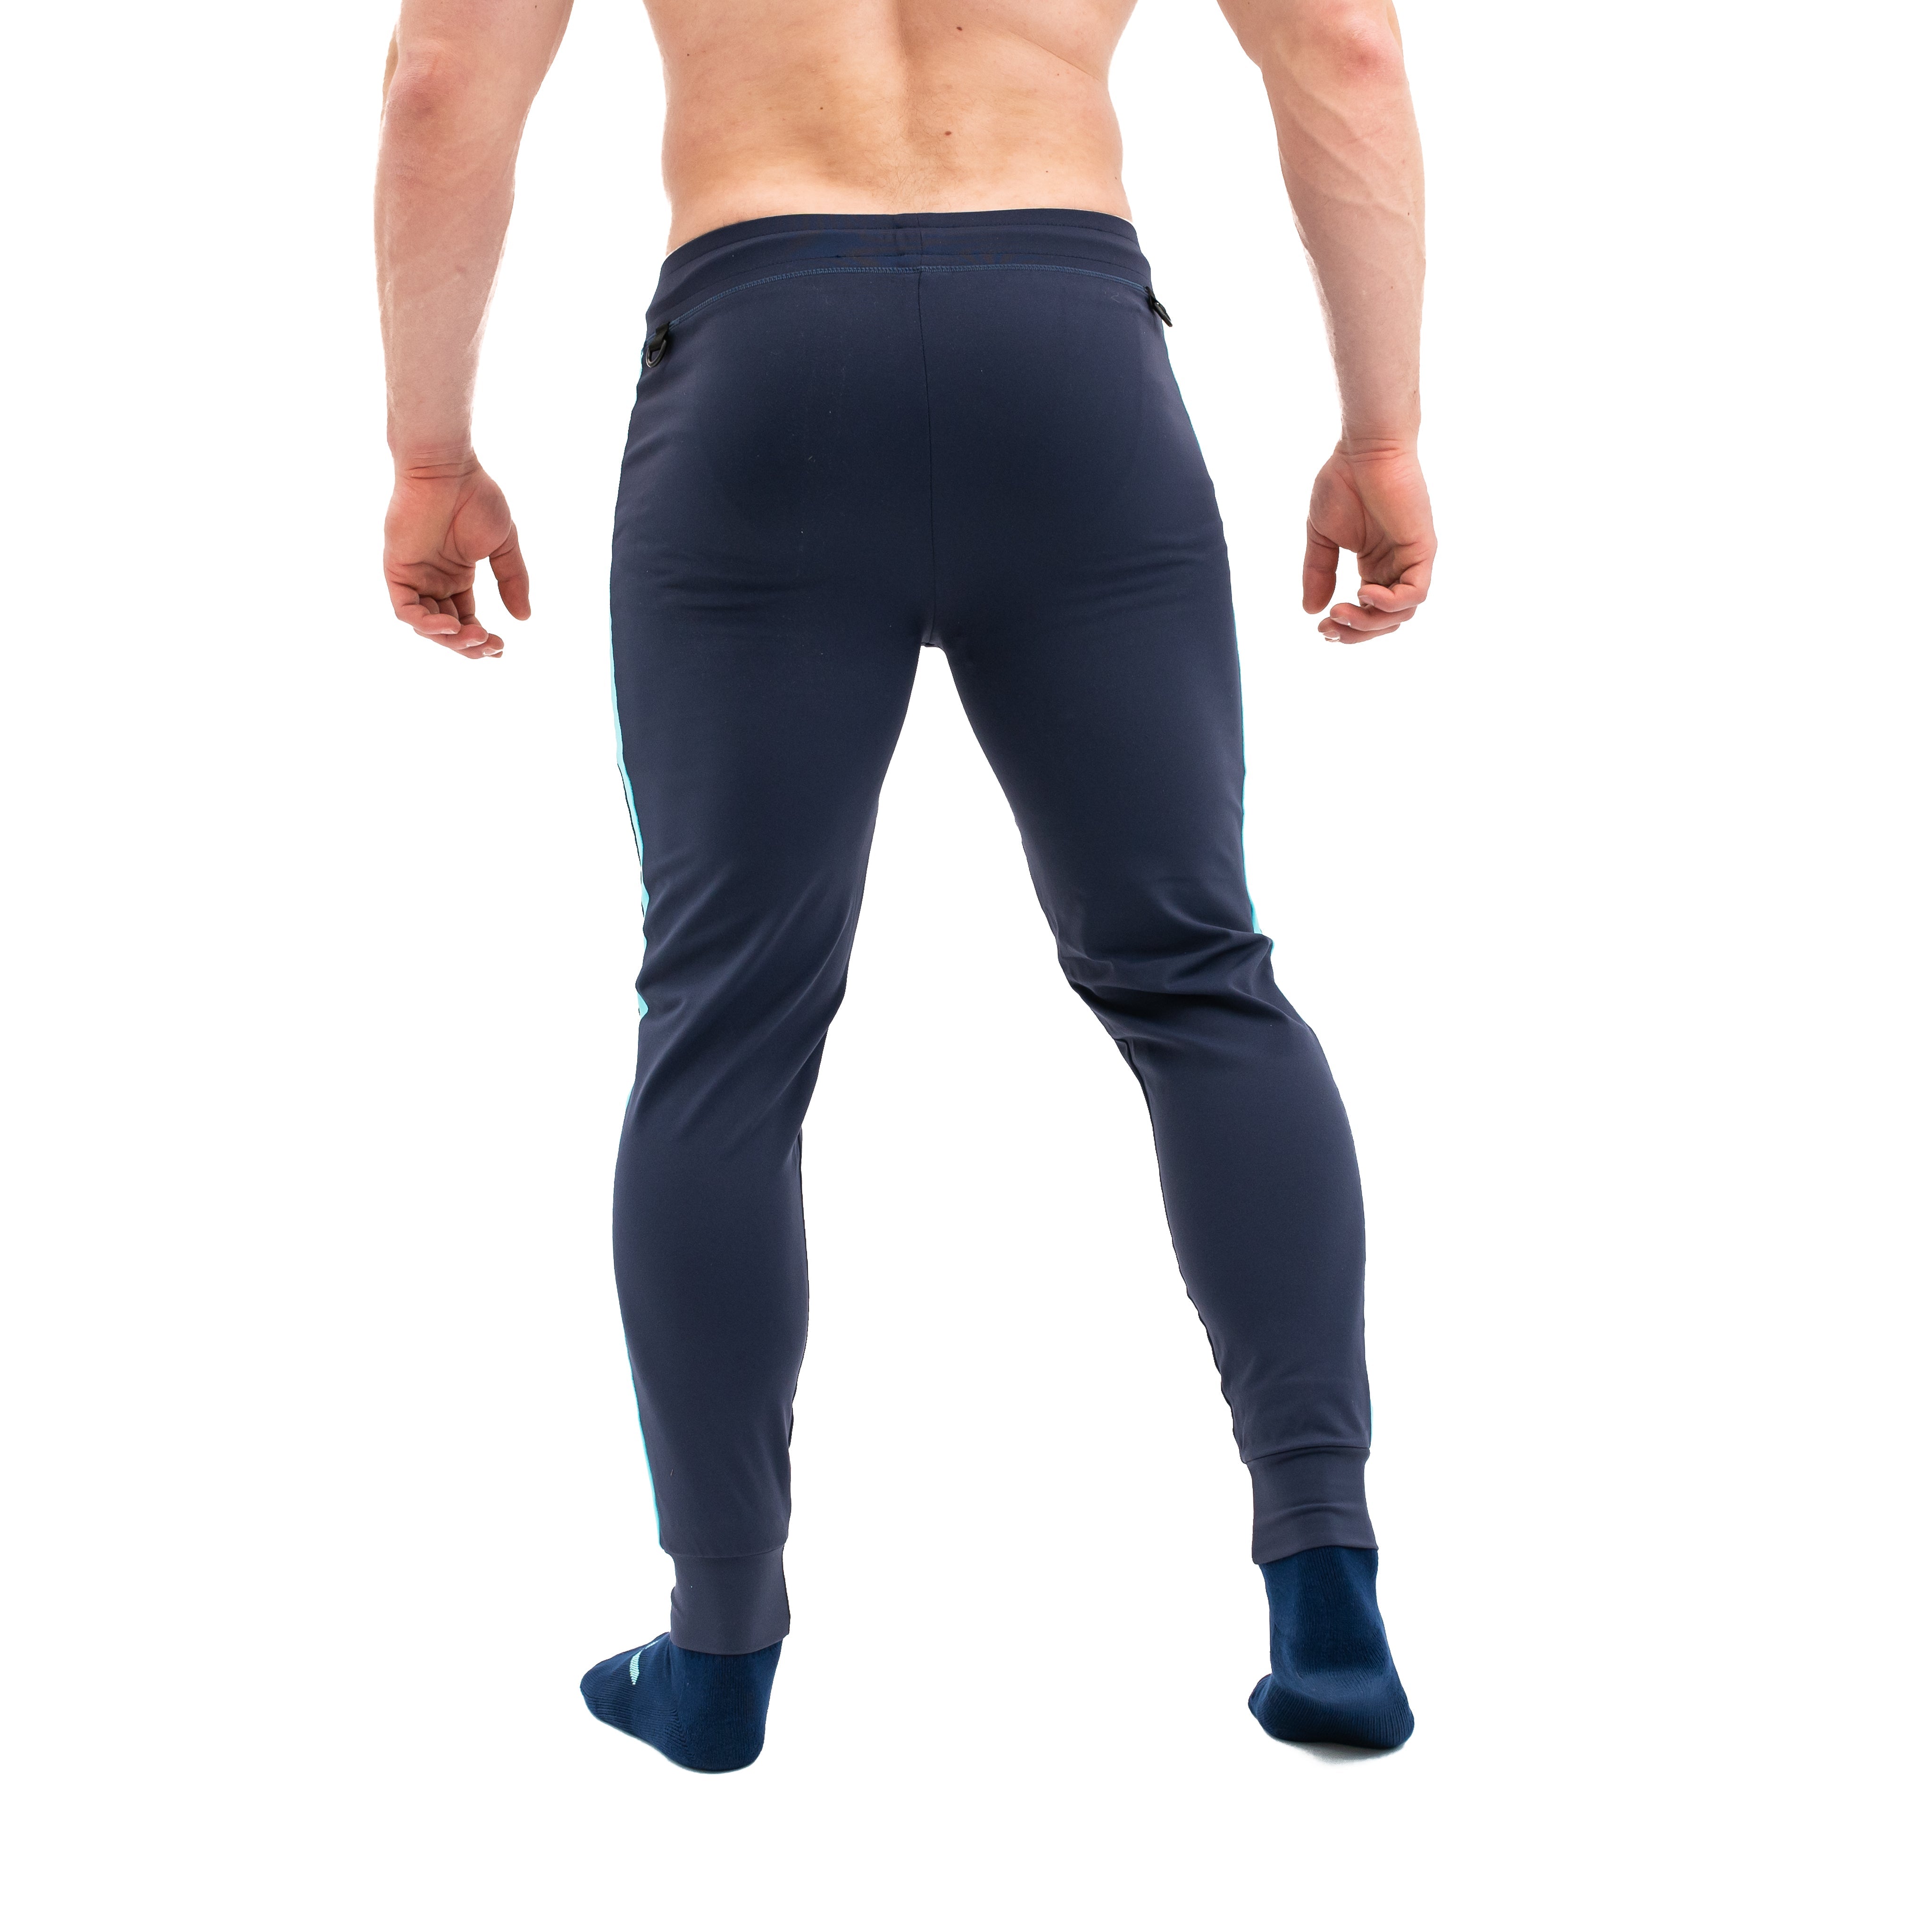 Iced Defy joggers are just as comfortable in the gym as they are going out. These are made with premium moisture-wicking 4-way-stretch material for greater range of motion. These are a great fit for both men and women and offer deep zippered pockets and tapered leg design. . Purchase Iced Defy Joggers from A7 UK shipping to UK or A7 Europe shipping to EU. 